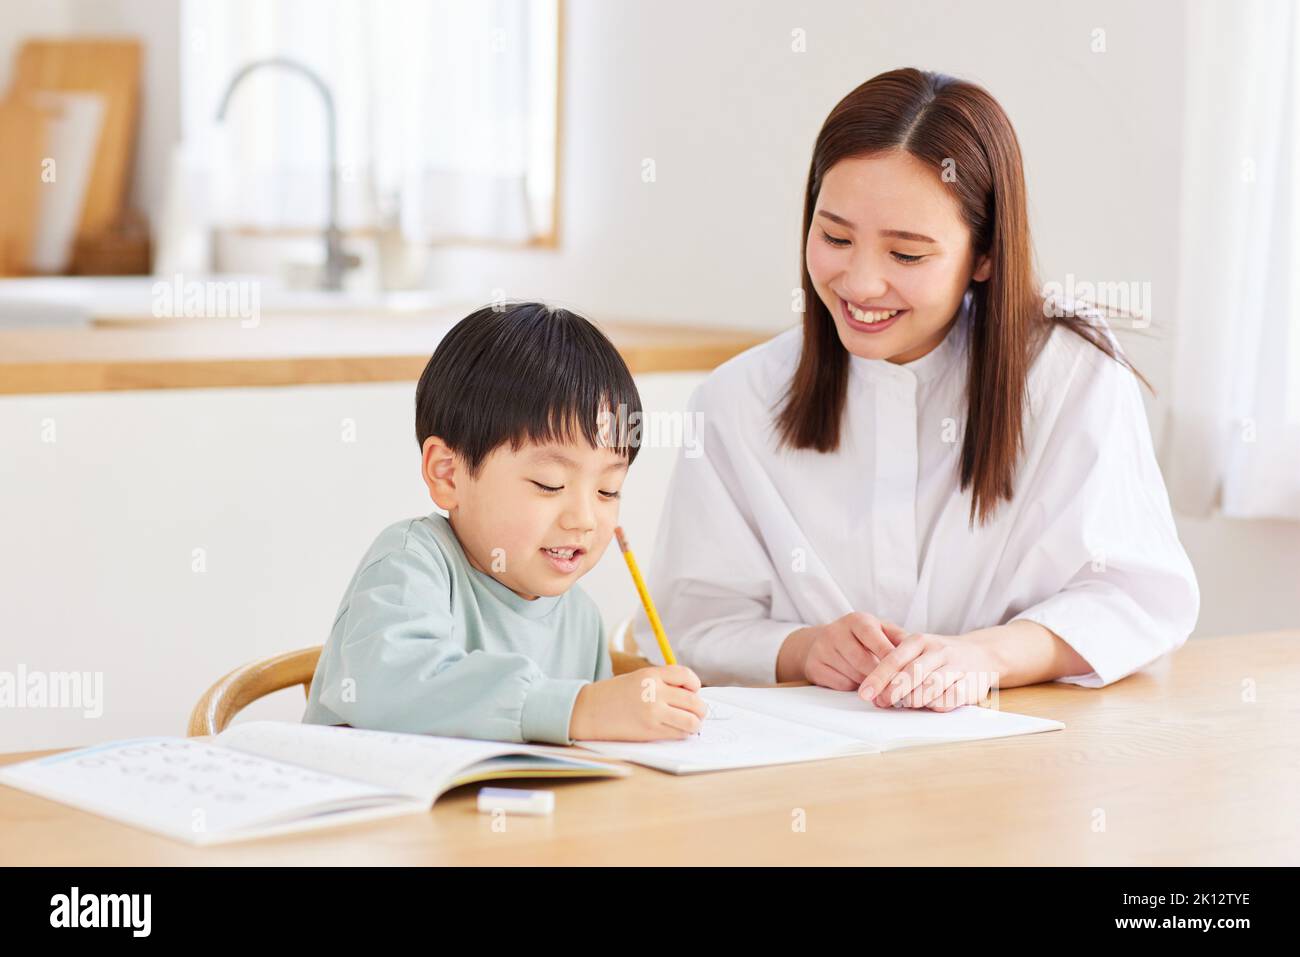 Japanese kid and mother studying at home Stock Photo